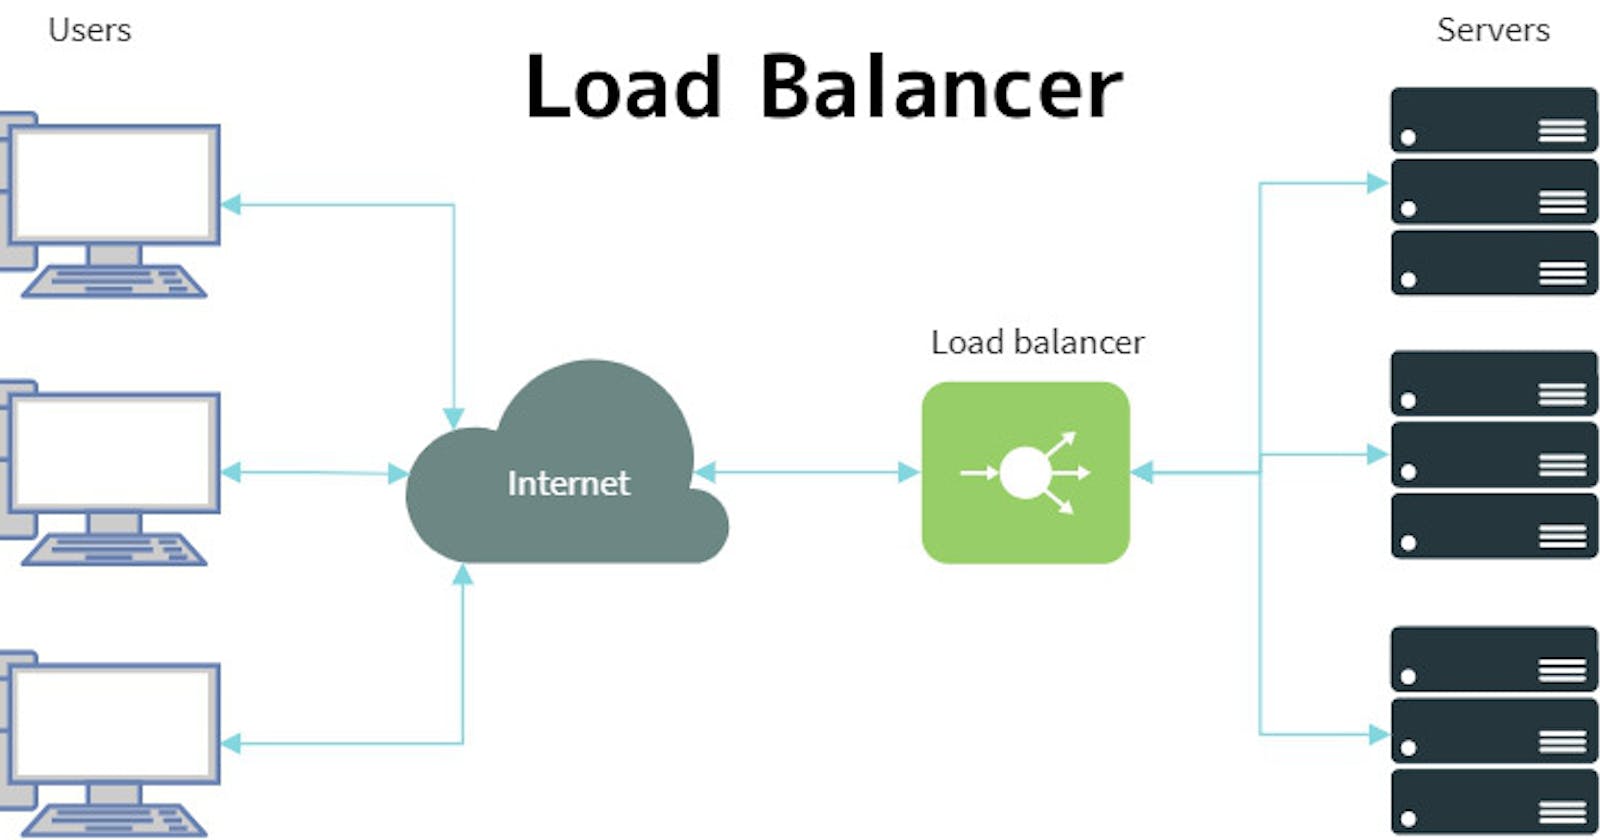 Build and Deploy an Nginx Load Balancing Infrastructure using Ansible and Vagrant